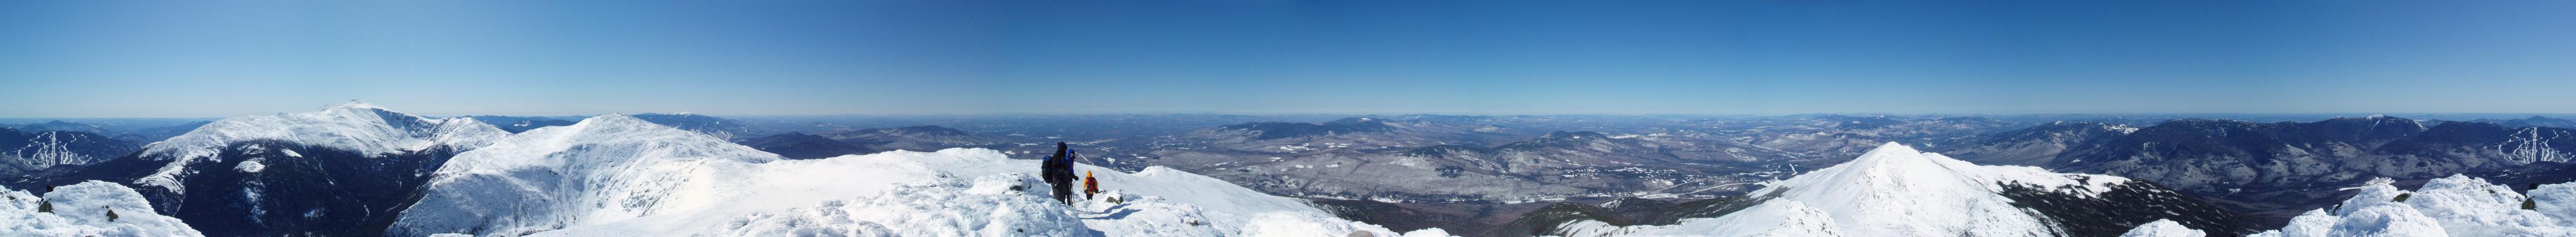 360-degree panoramic view from Mount Adams in New Hampshire in winter